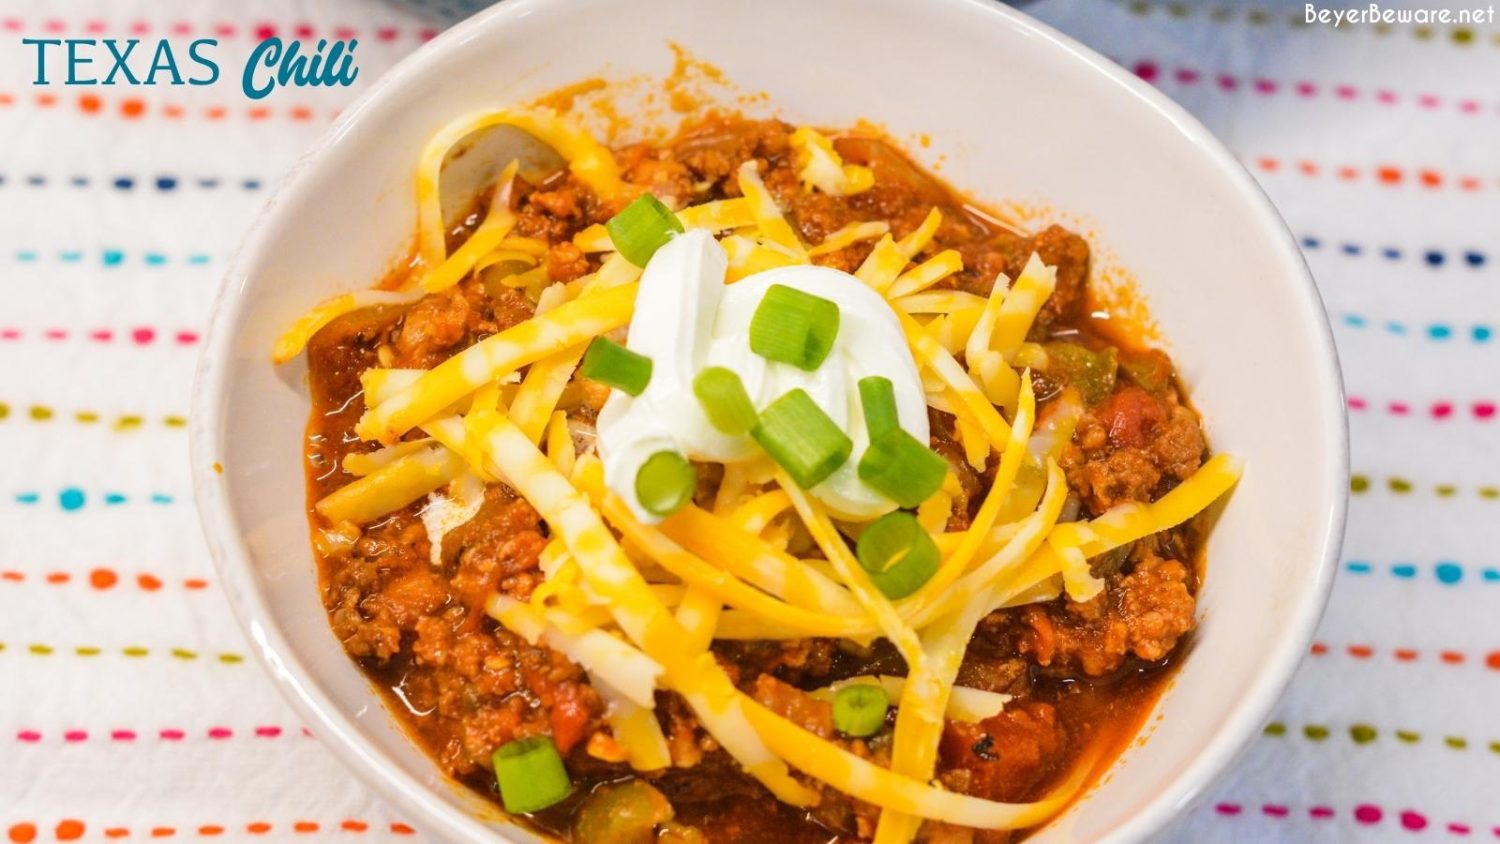 Texas chili is loaded with beef, peppers, and heat while it doesn't have been or pasta in the chili.